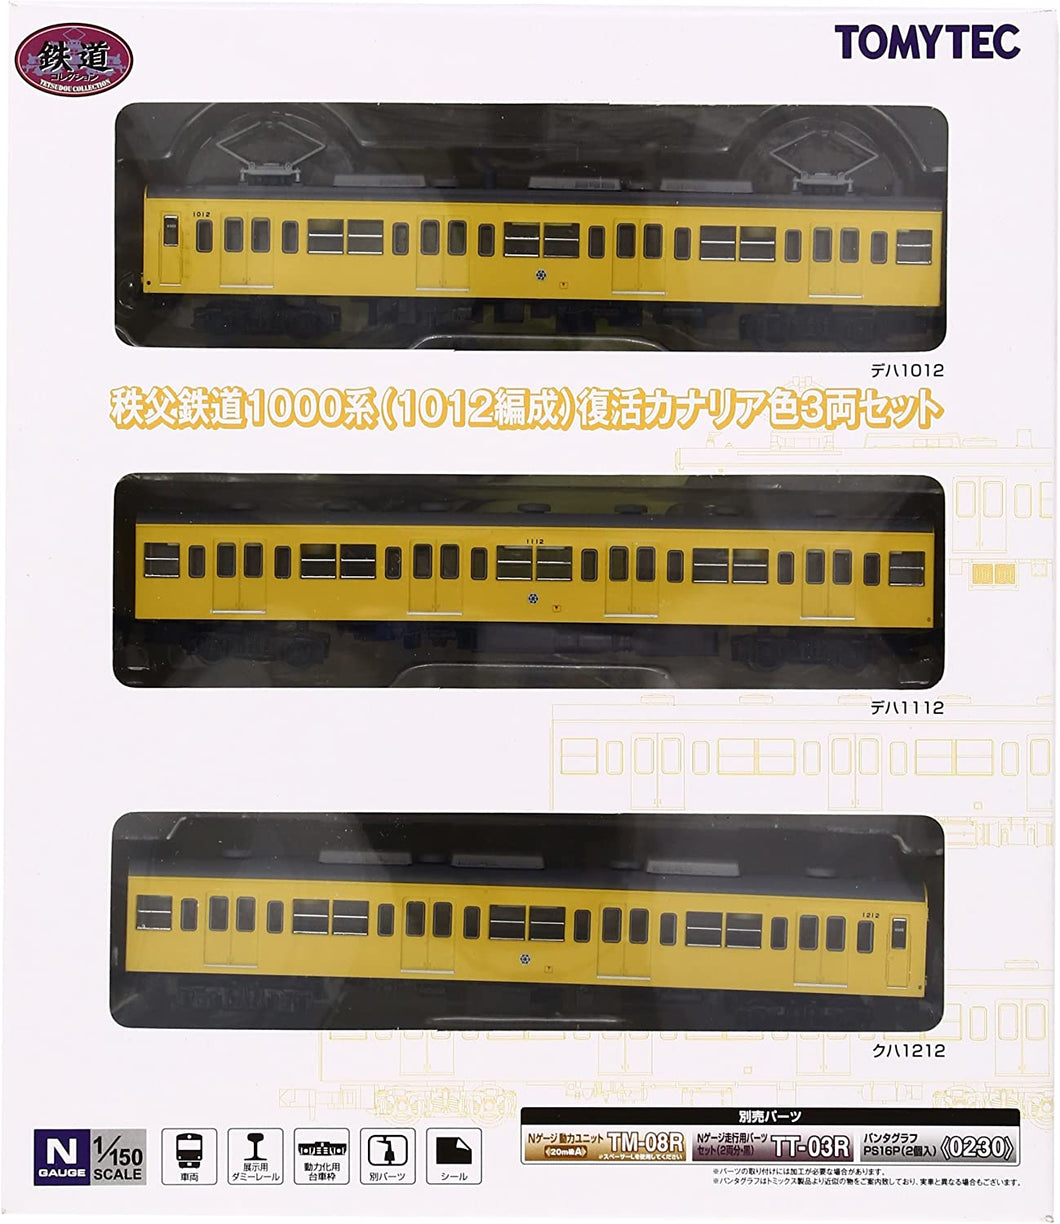 Tomytec 253792 Railway Collection Chichibu (1012 formation) Canary 3s-Car N Scale